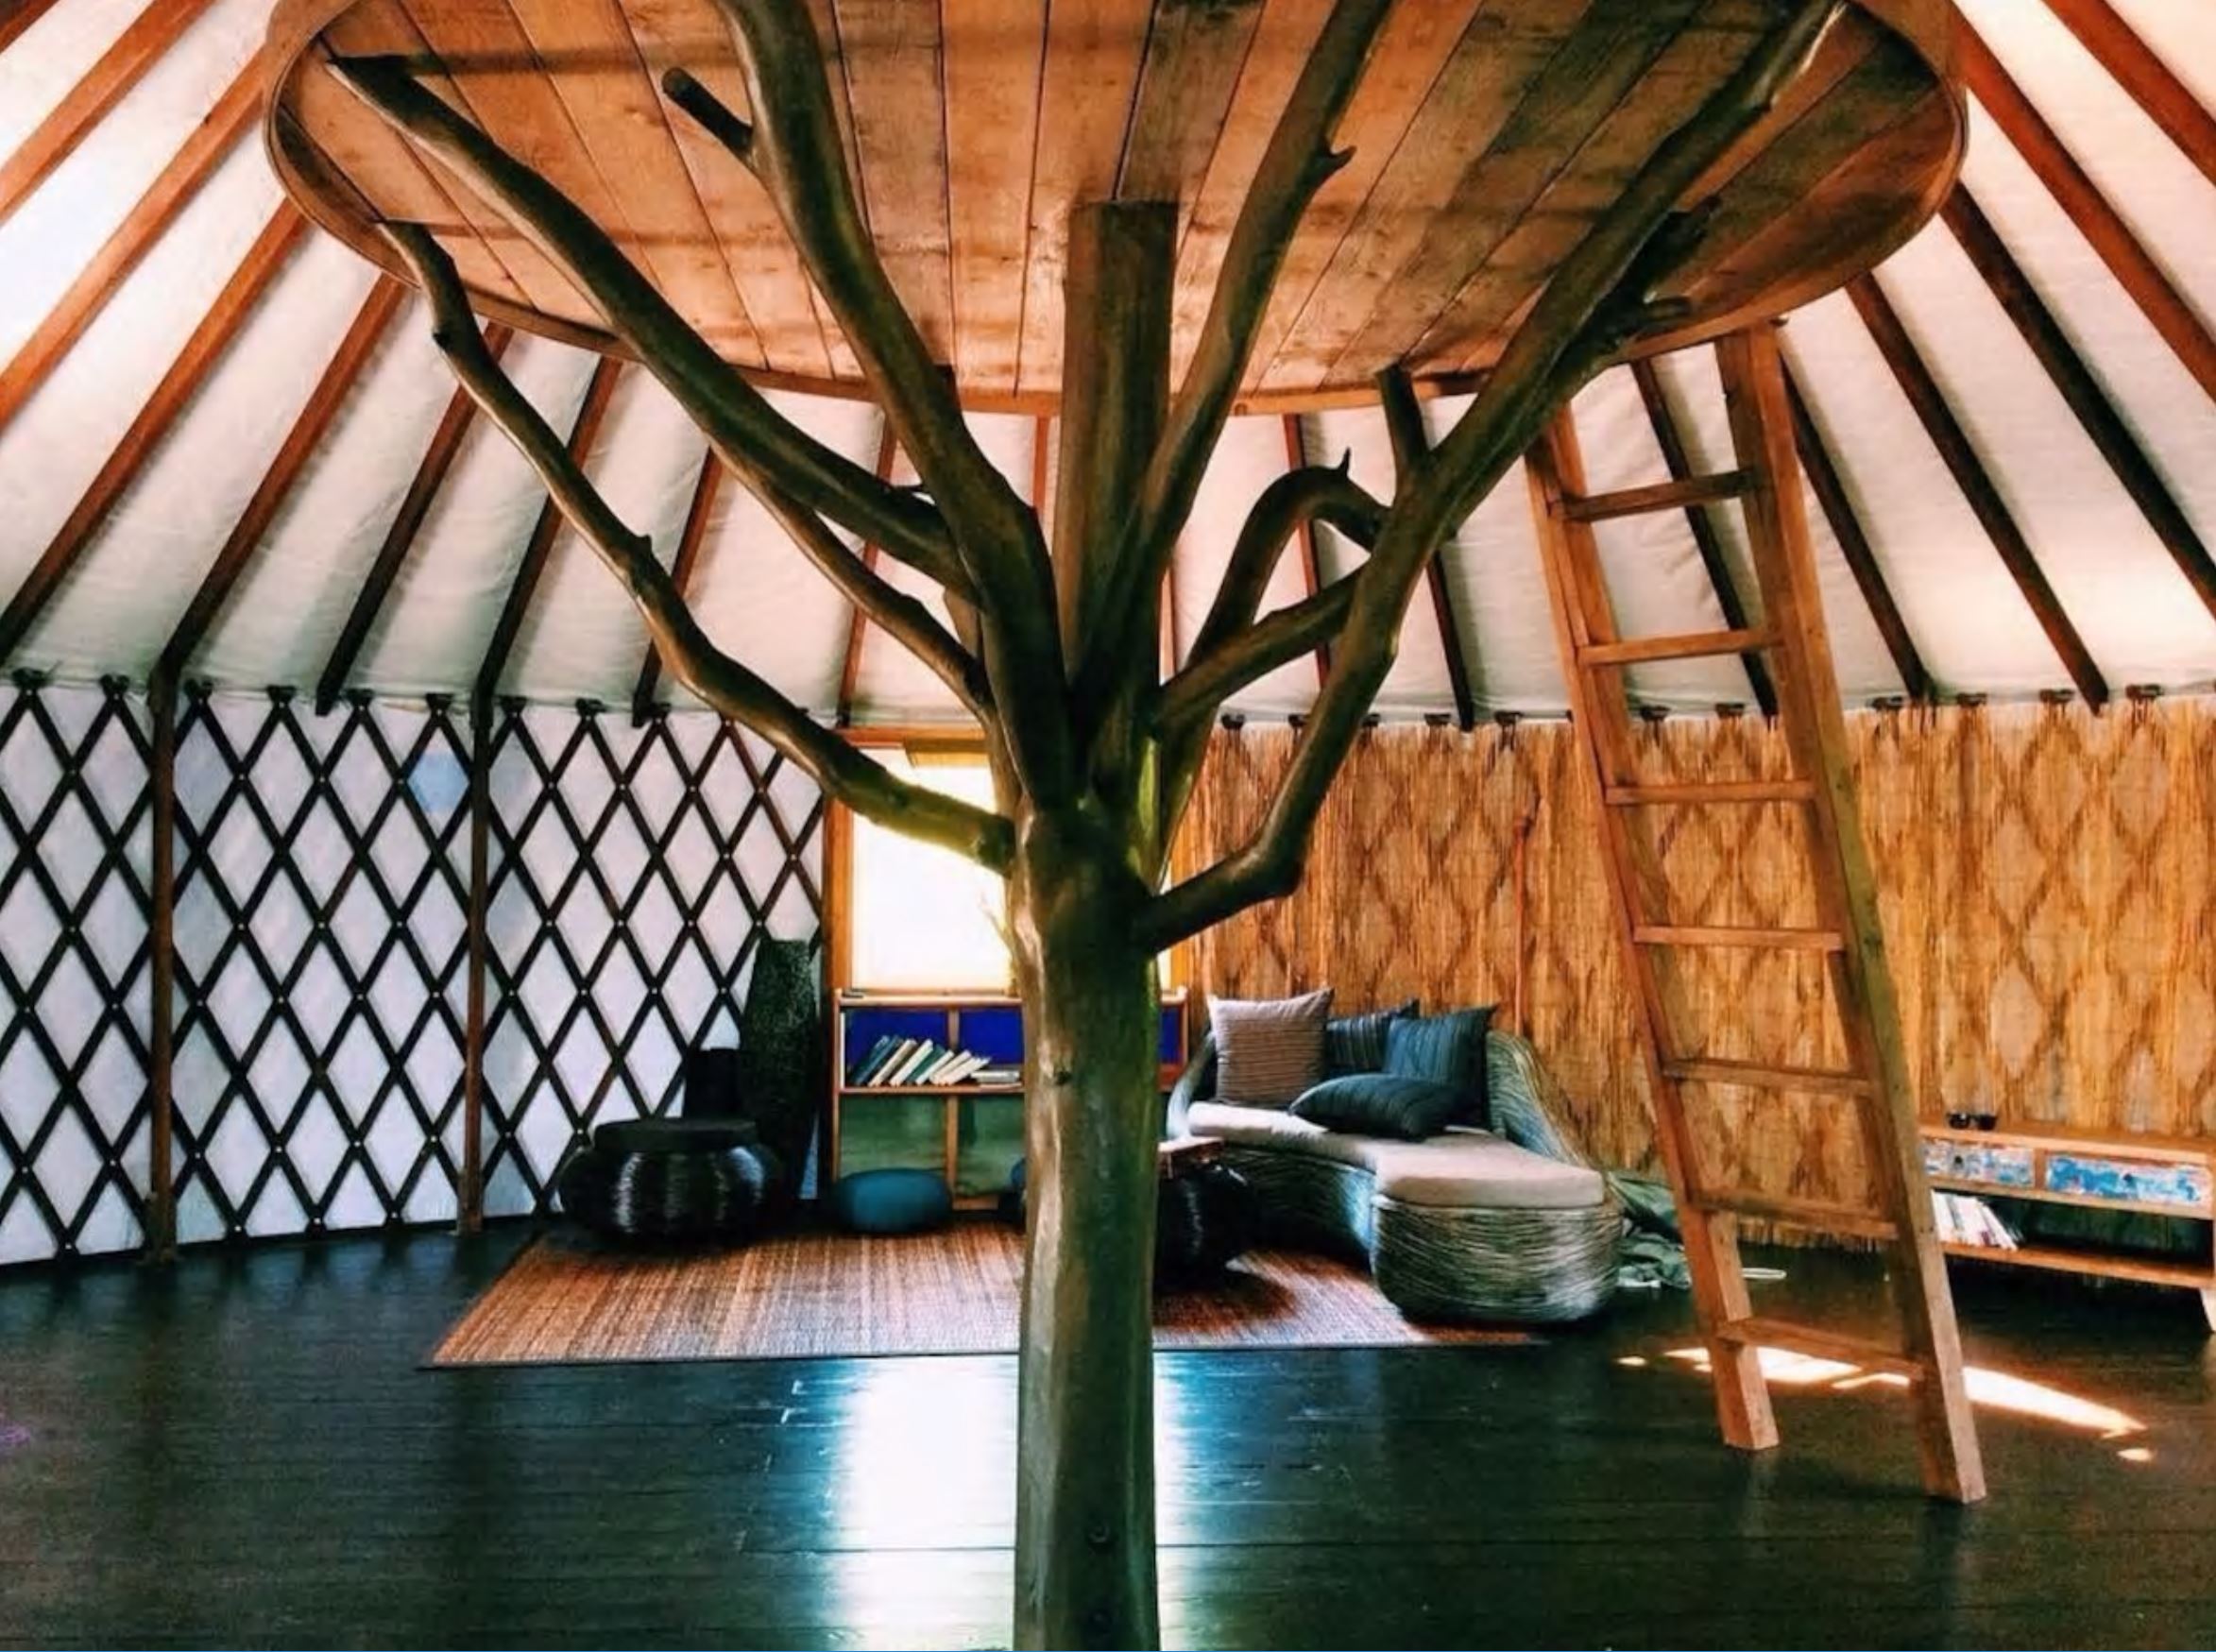  3. Mango Tree, Pahoa, entire home, 4 guests: This spacious yurt is and eco-friendly paradise in Puna jungle, Big Island. You may find Nala the cat lounging in the bed lofted in the center of the Yurt. MORE INFO